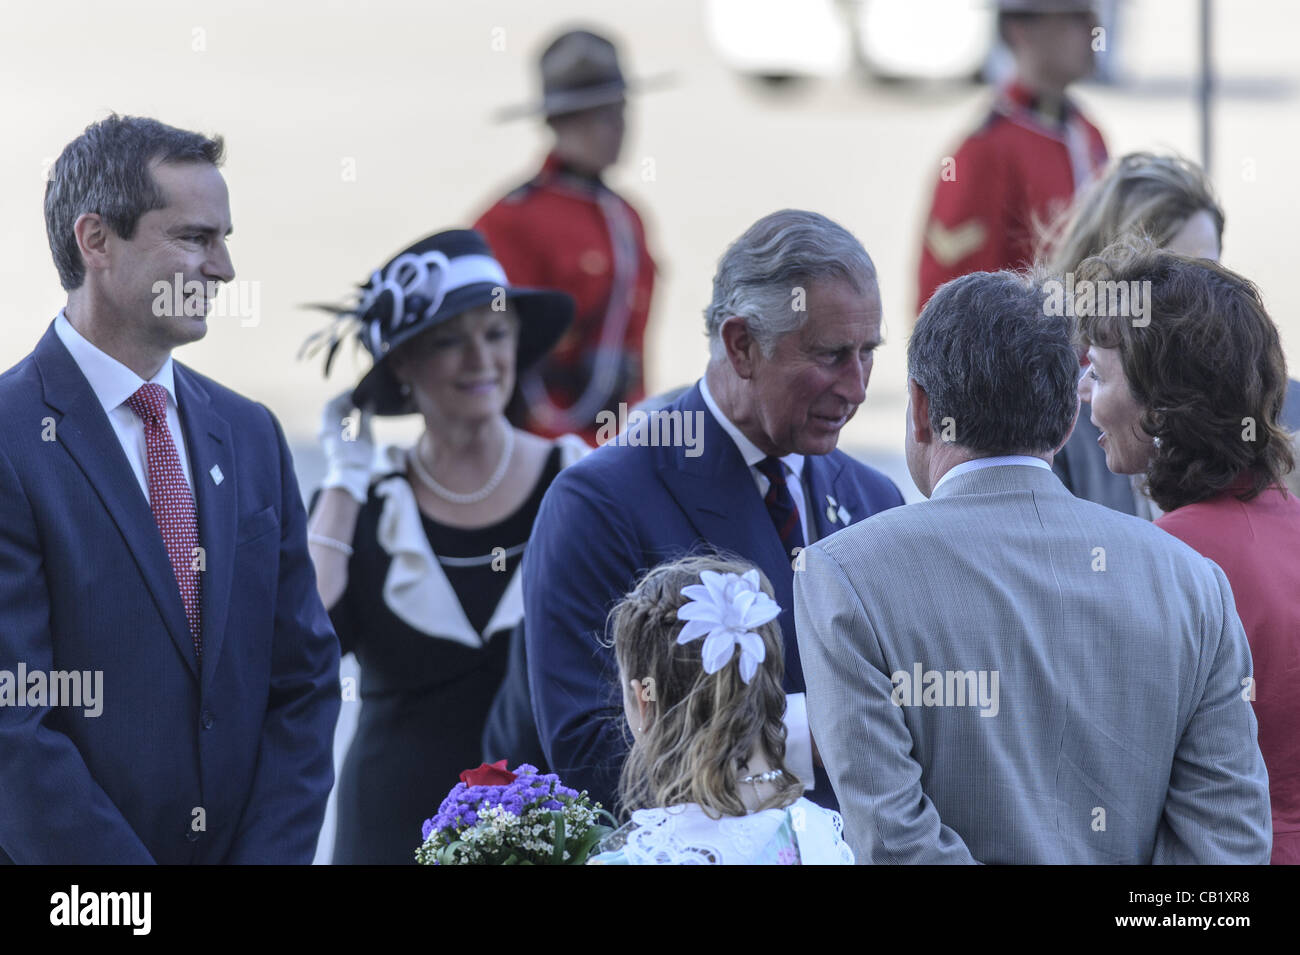 May 21, 2012 - Toronto, Ontario, Canada - PRINCE CHARLES and his wife CAMILLA, Duchess of Cornwall have kicked off the Ontario leg of their Canadian tour. In picture - Ontratio Premier DALTON MCGUINTY, PRINCE CHARLES, RUTH ANN ONLEY (Credit Image: © Igor Vidyashev/ZUMAPRESS.com) Stock Photo